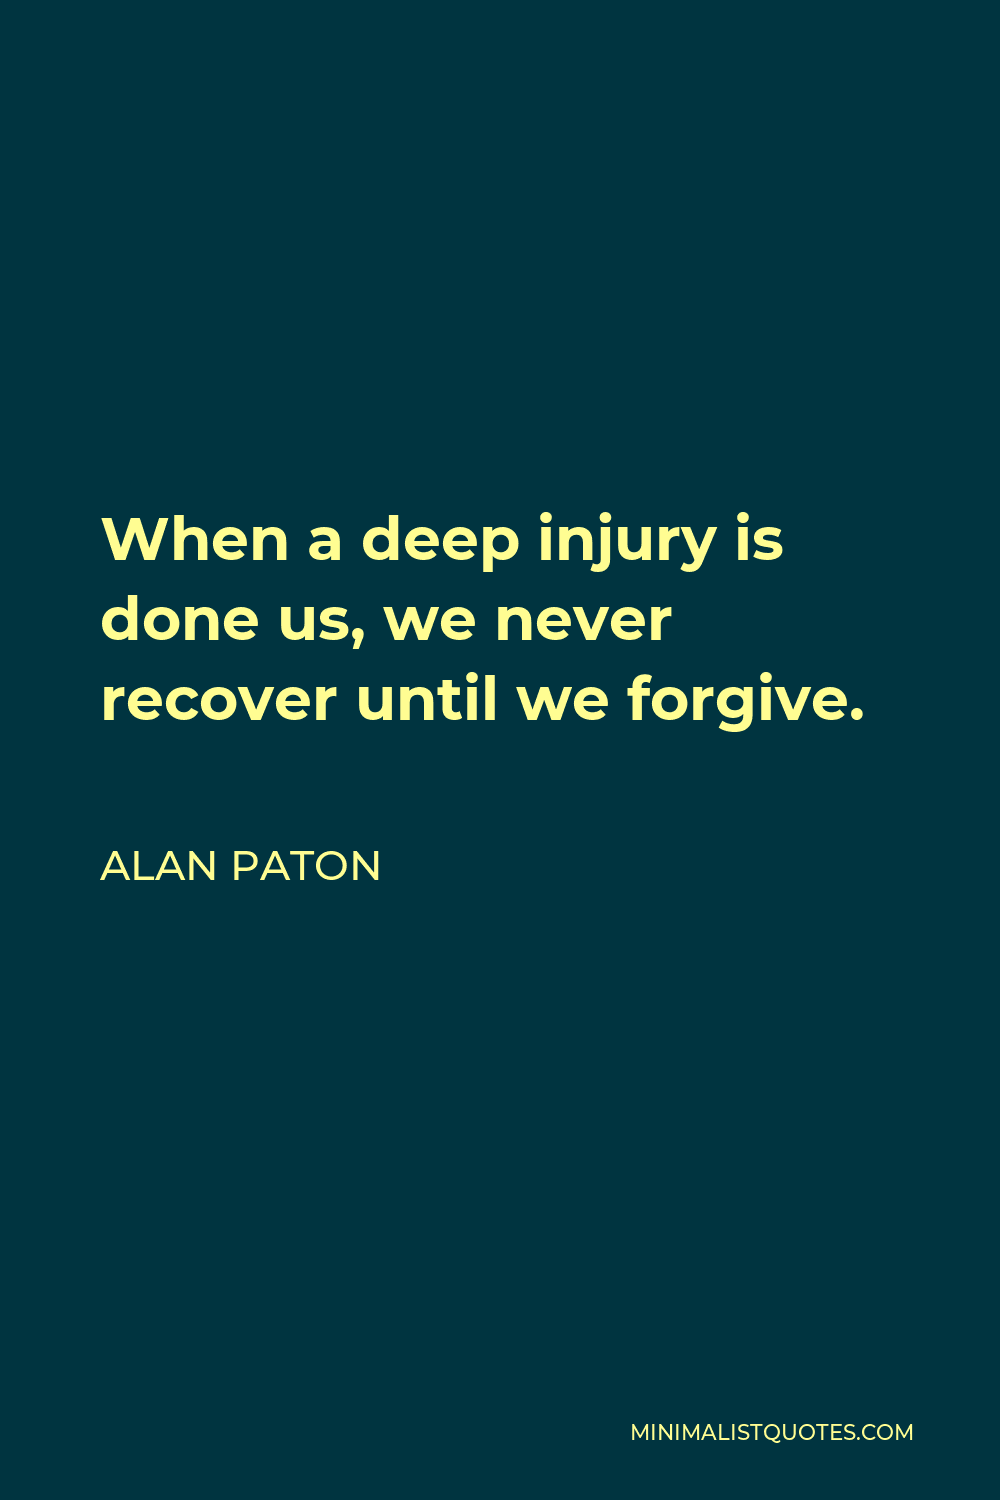 Alan Paton Quote - When a deep injury is done us, we never recover until we forgive.